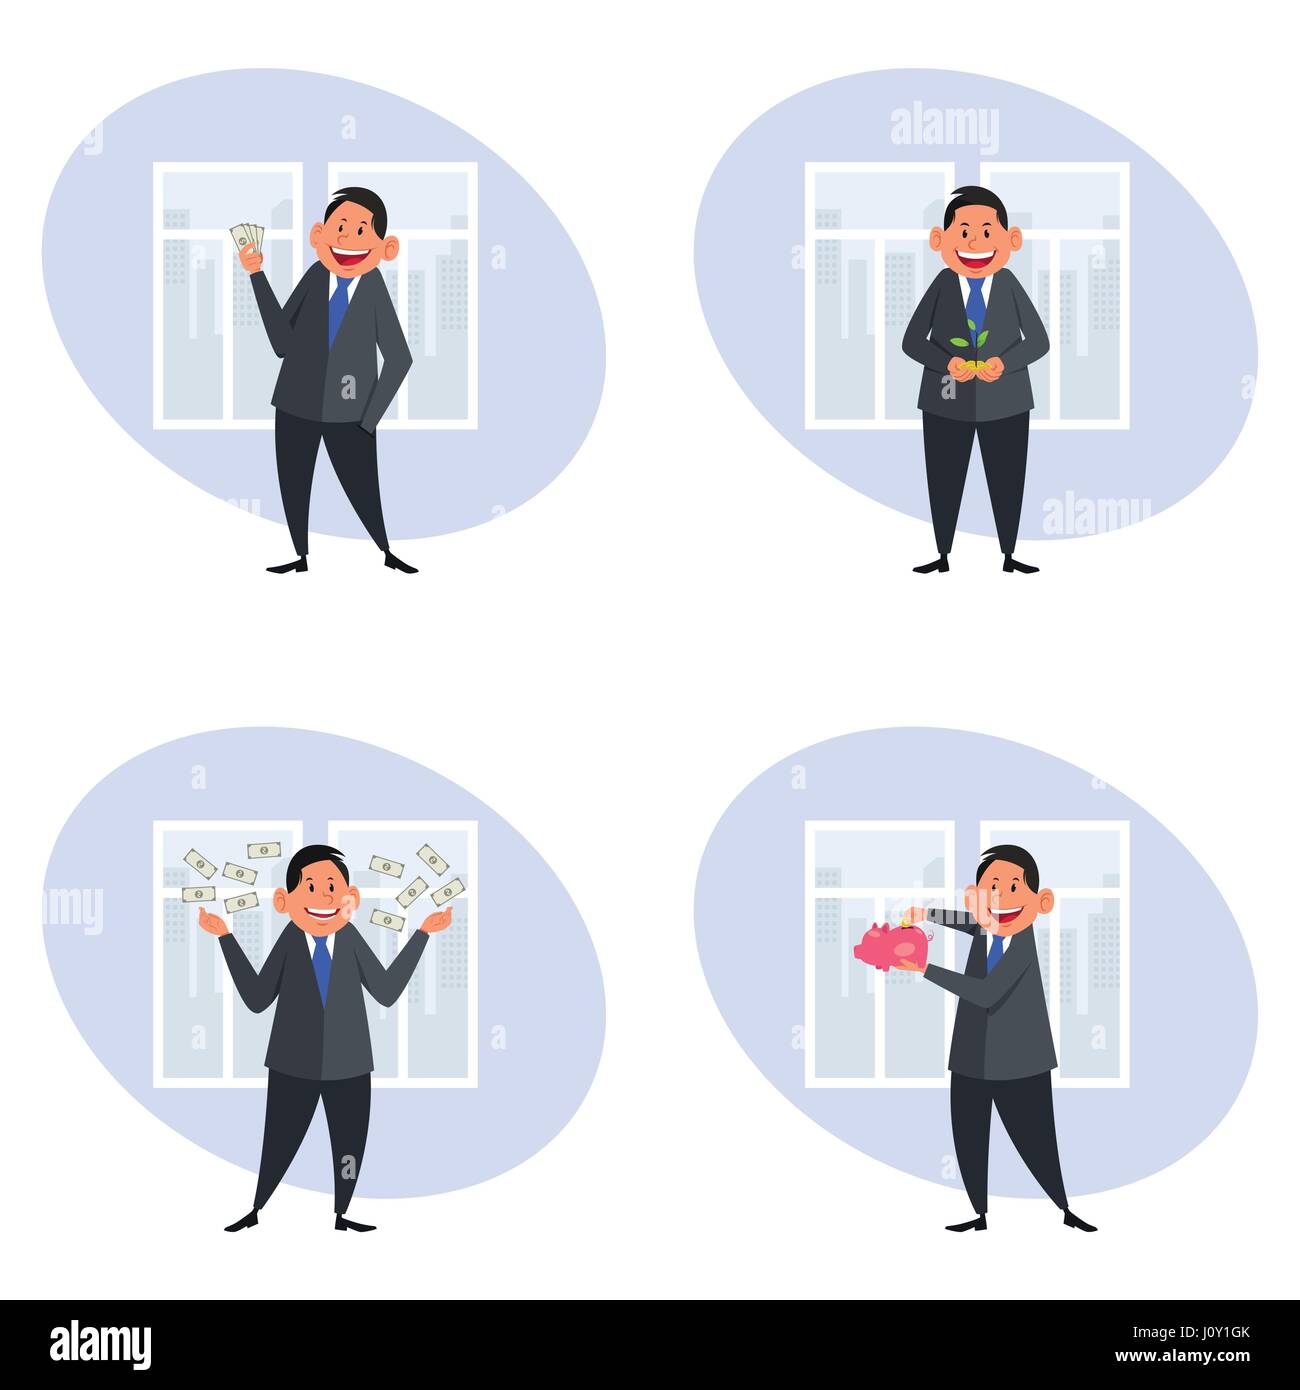 A vector illustration of business and finance icon sets Stock Vector